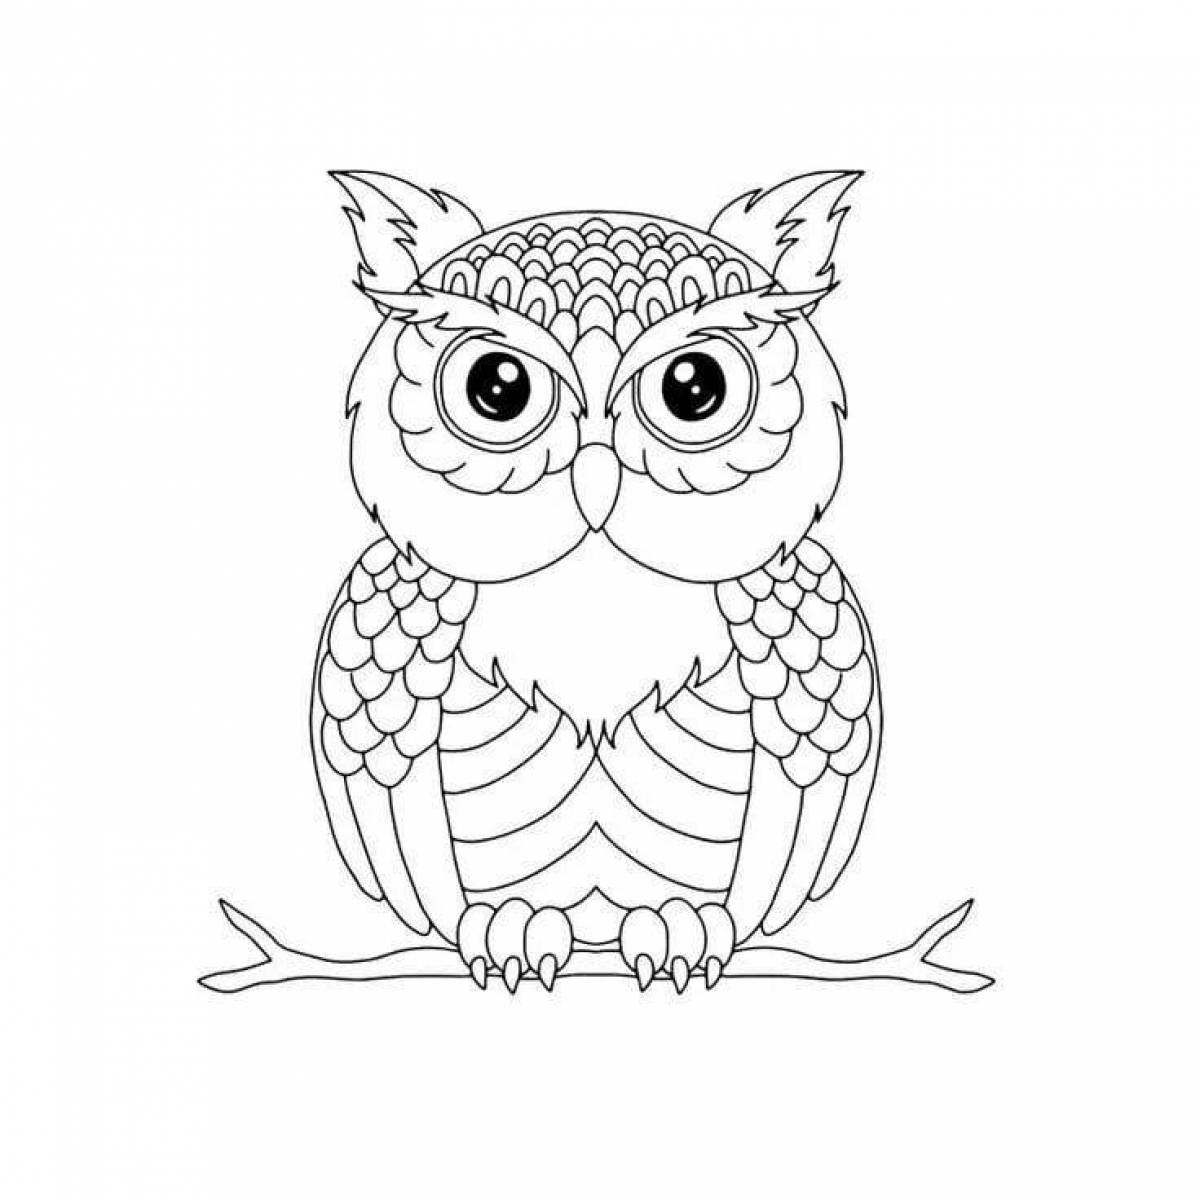 Coloring page mesmerizing owl on a tree